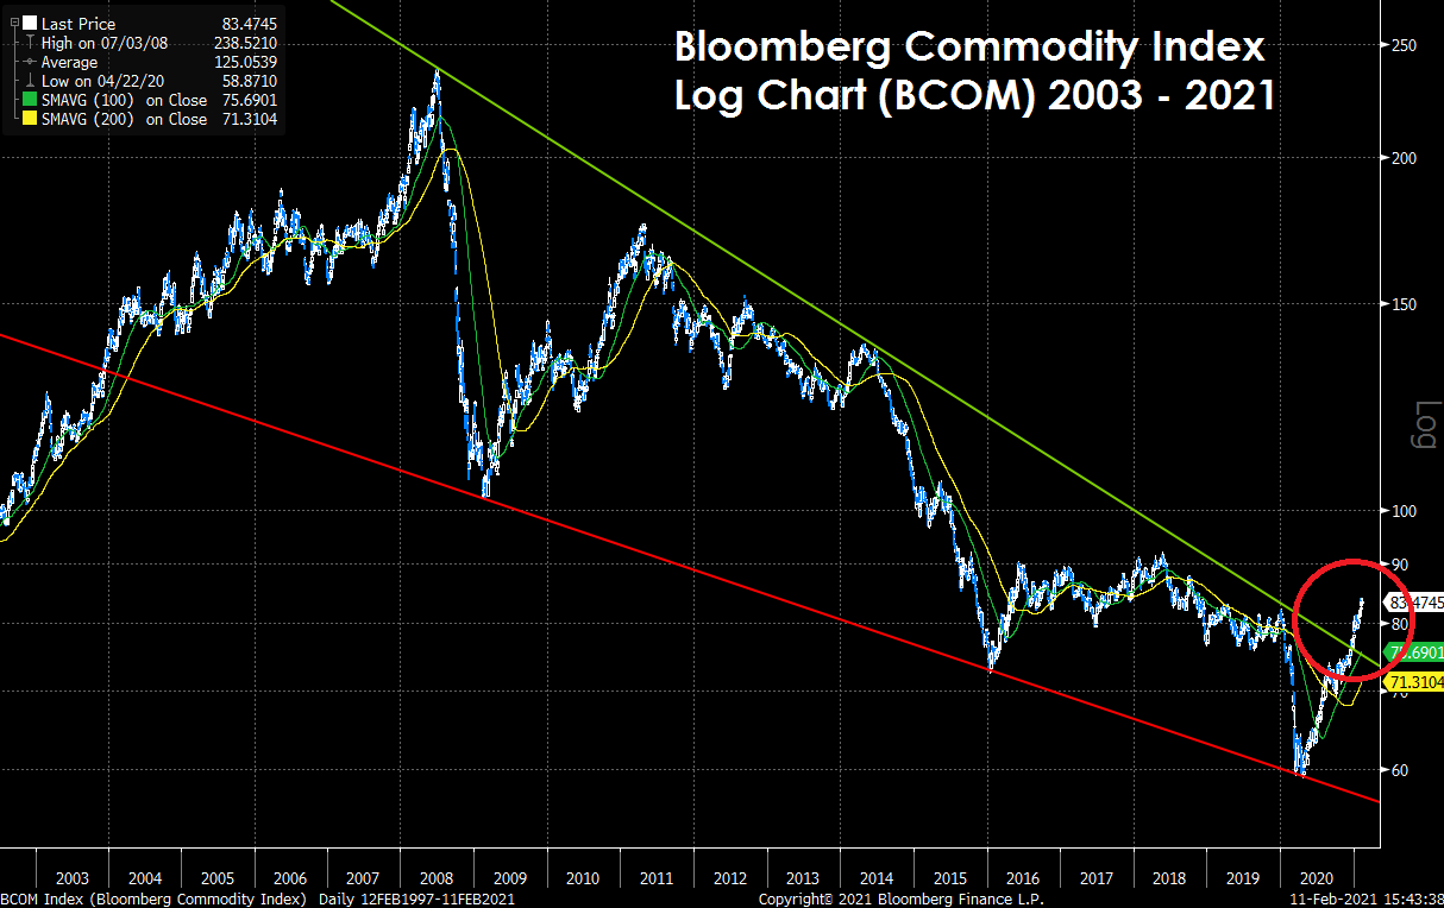 Bloomberg Commodity Index Log chart broke the long-term bear trend at the end of 2020